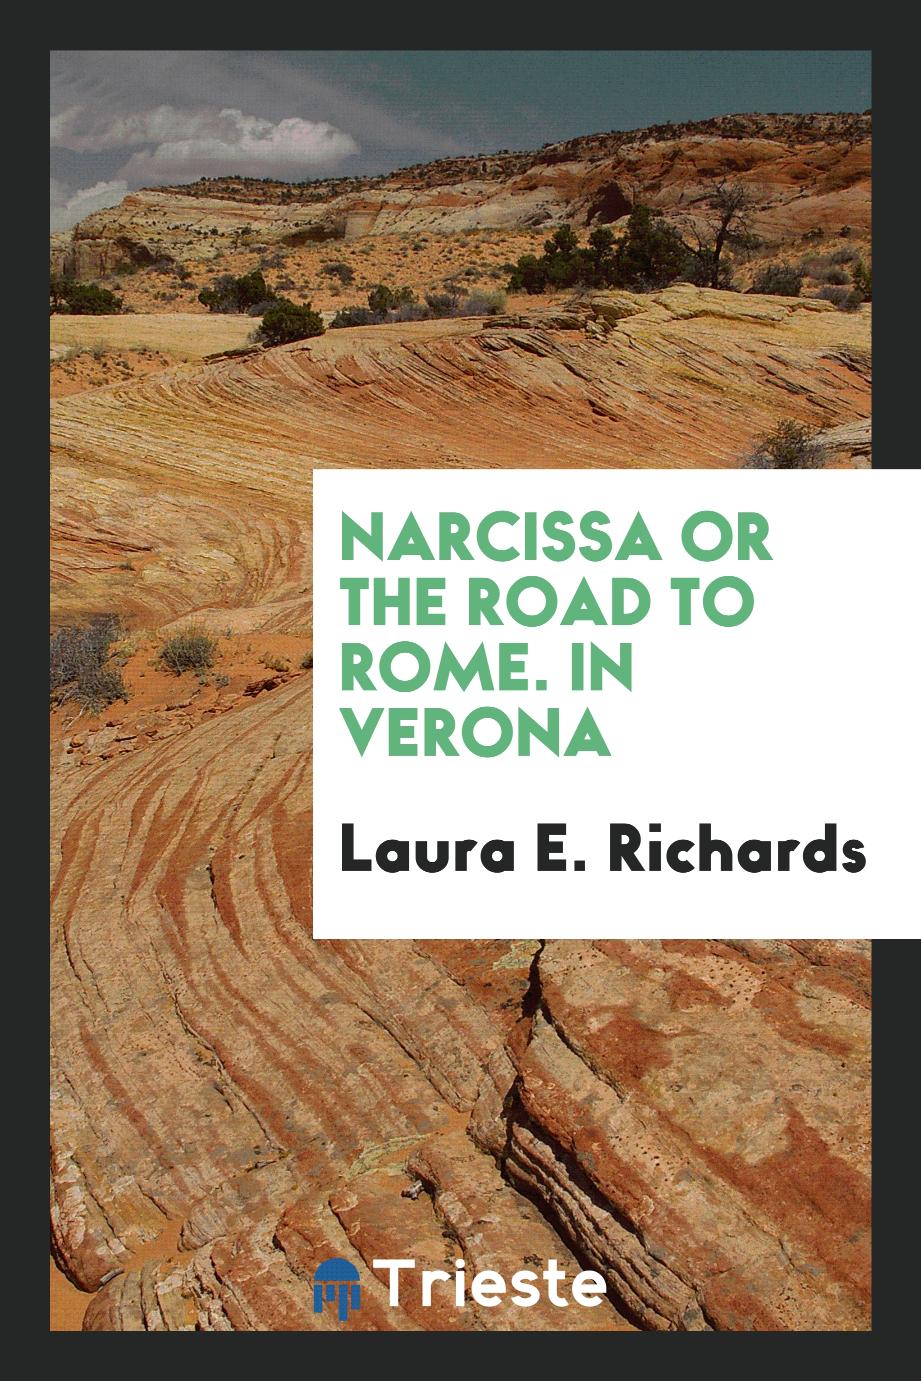 Narcissa or the Road to Rome. In Verona